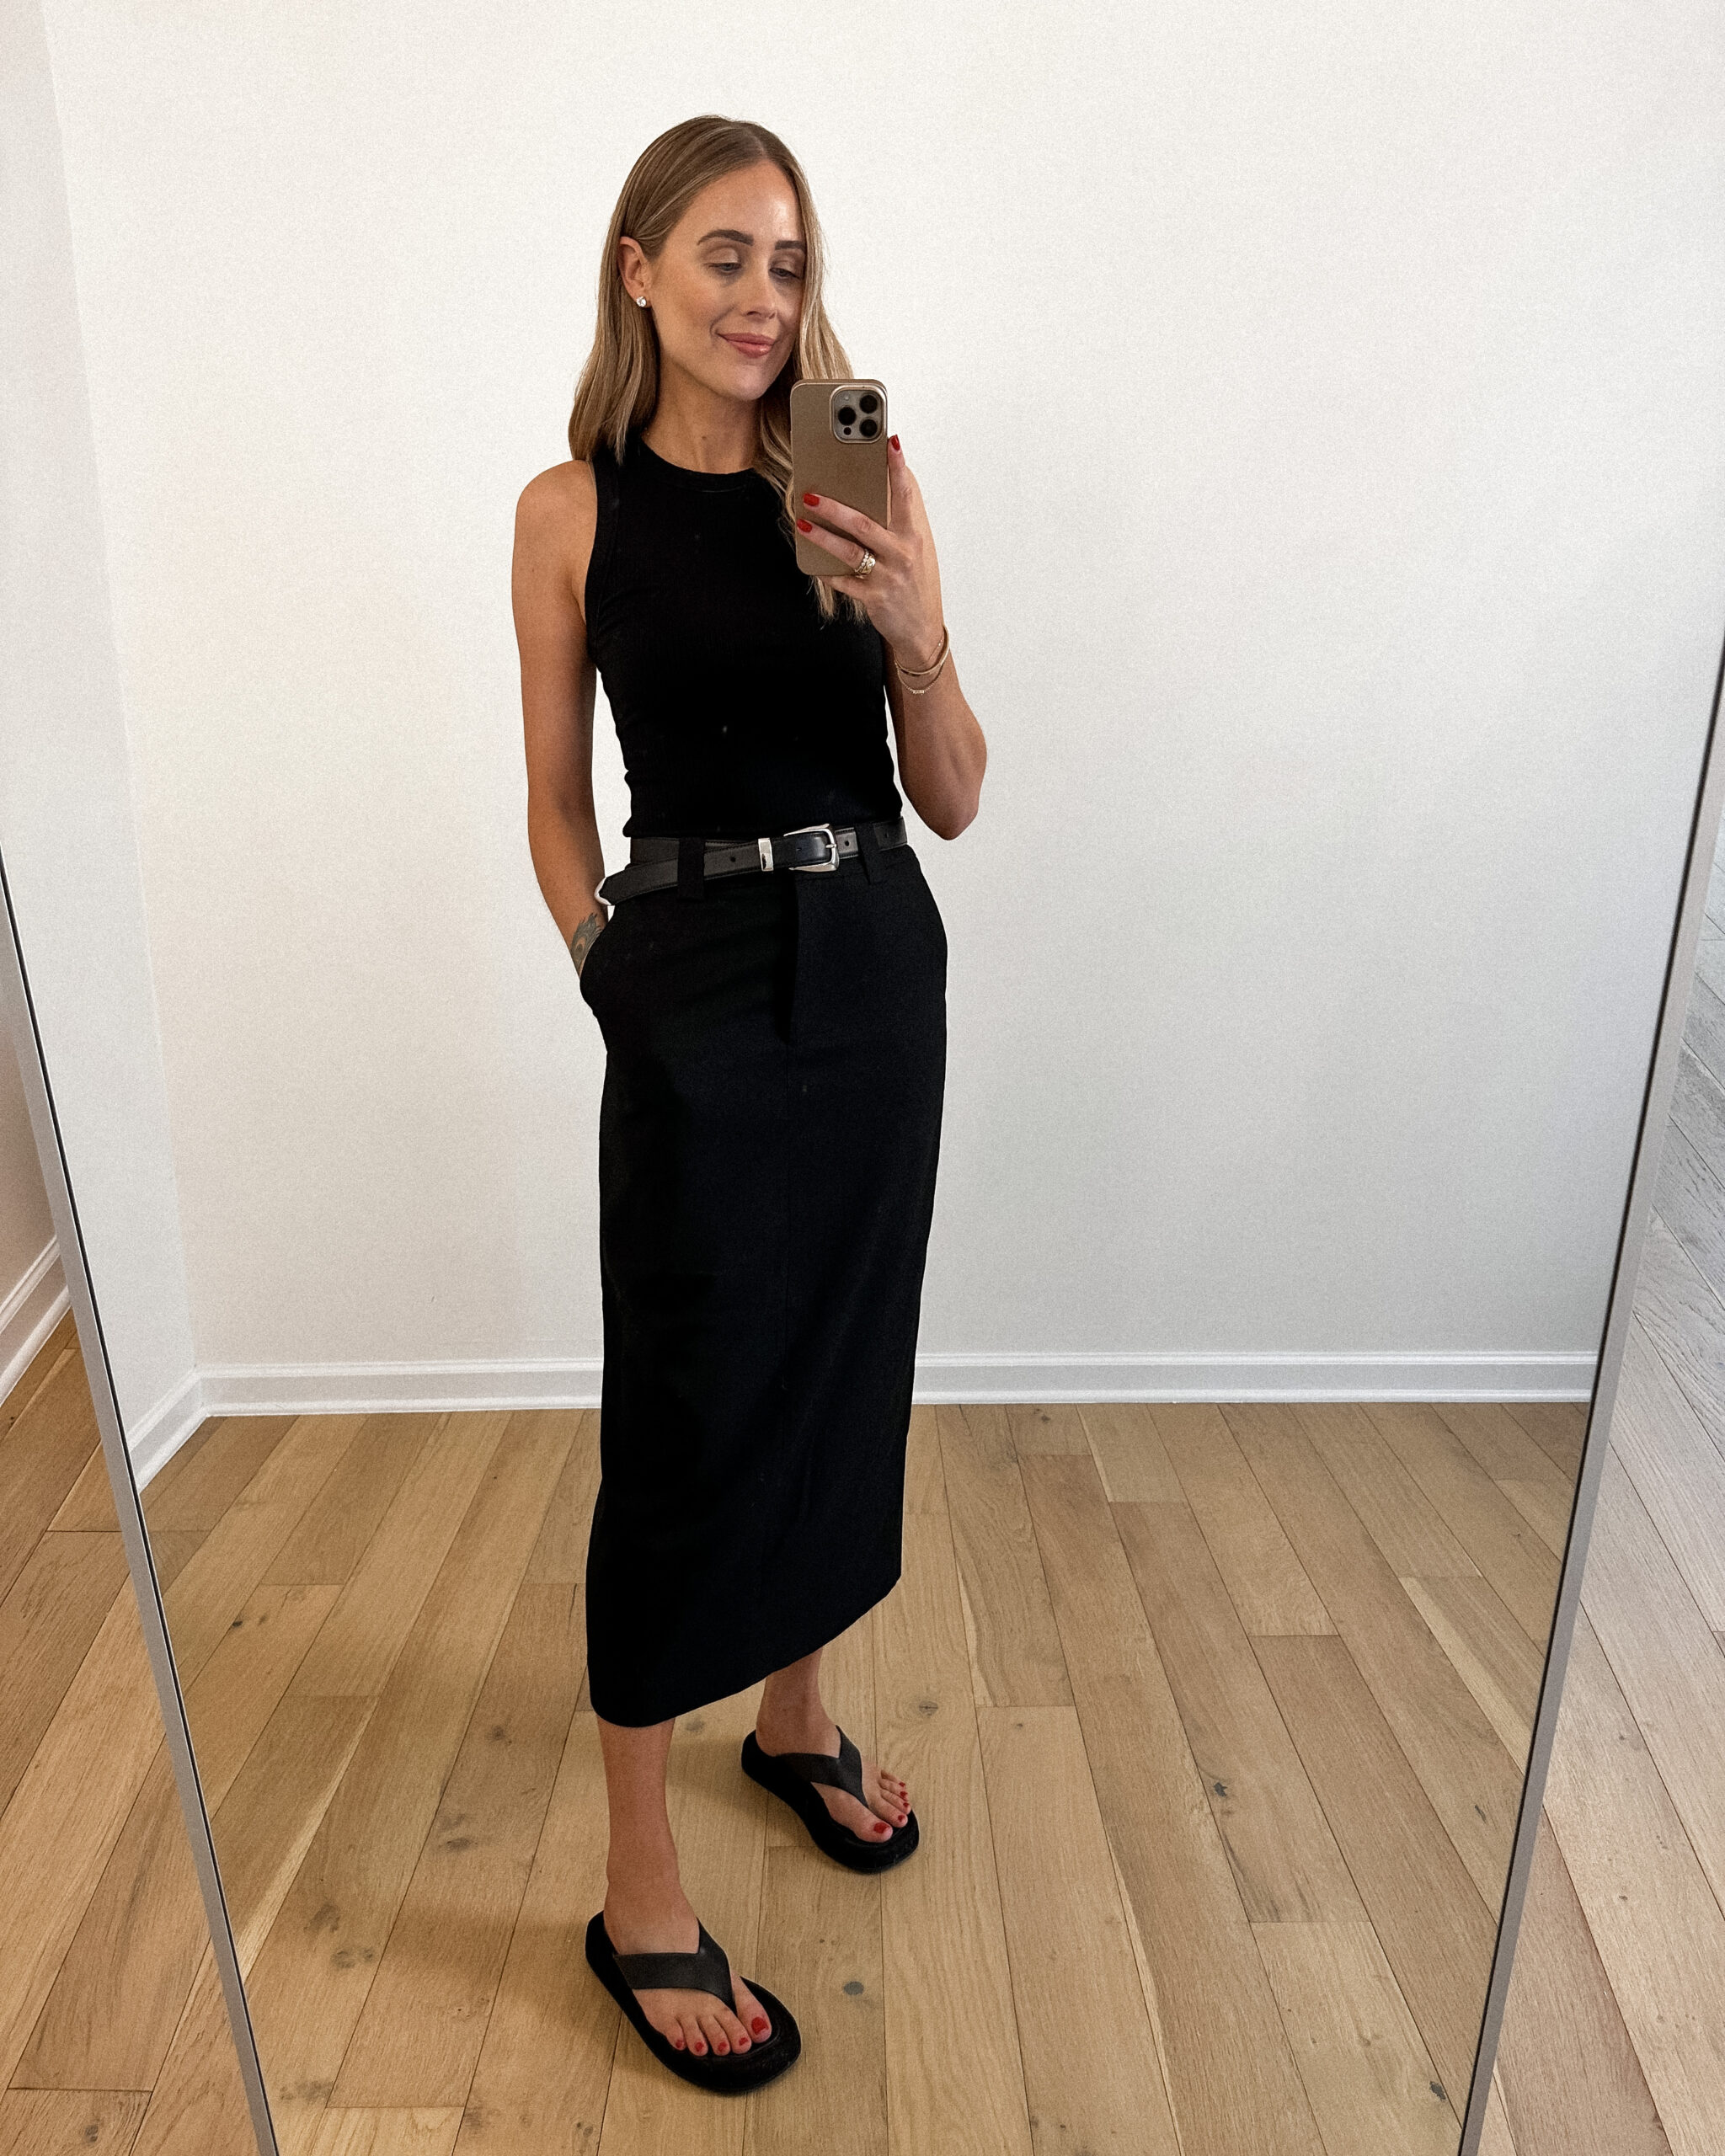 Fashion Jackson Wearing MAYSON the label Black Fitted Tank, Black Column Maxi Skirt, Khaite Black Benny Belt, The Row Ginza black leather suede sandals, casual outfit